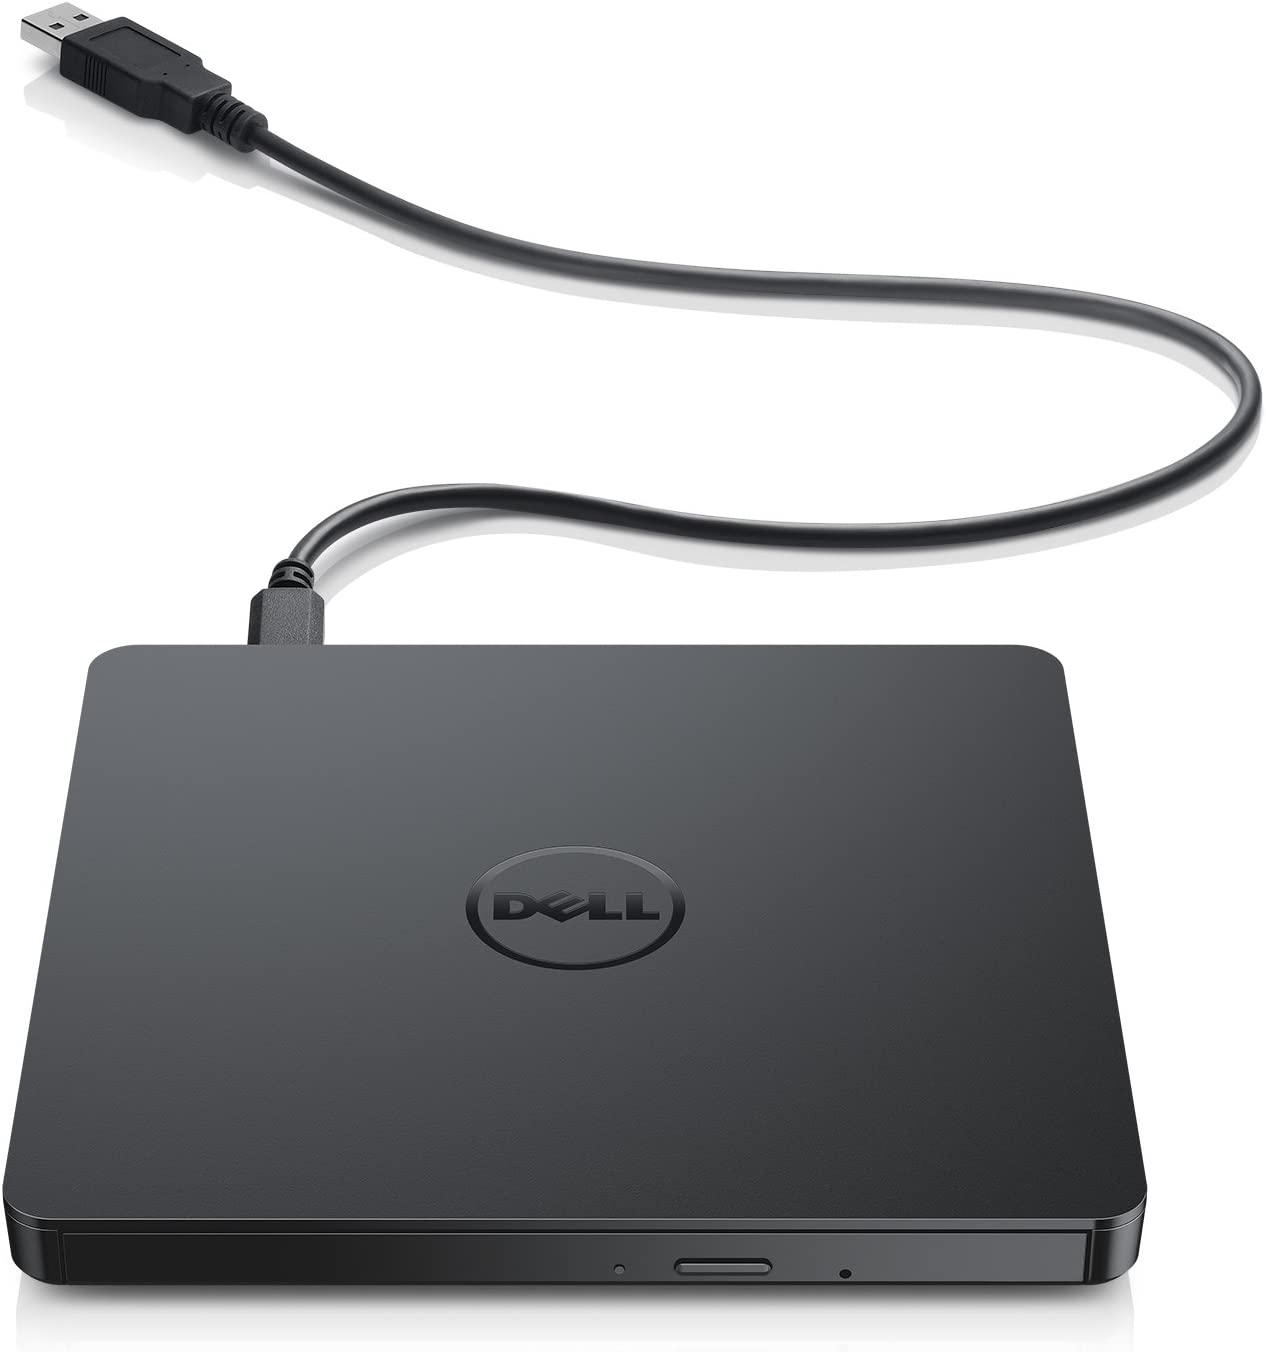 DVD / CD drive for pc, laptop or Mac